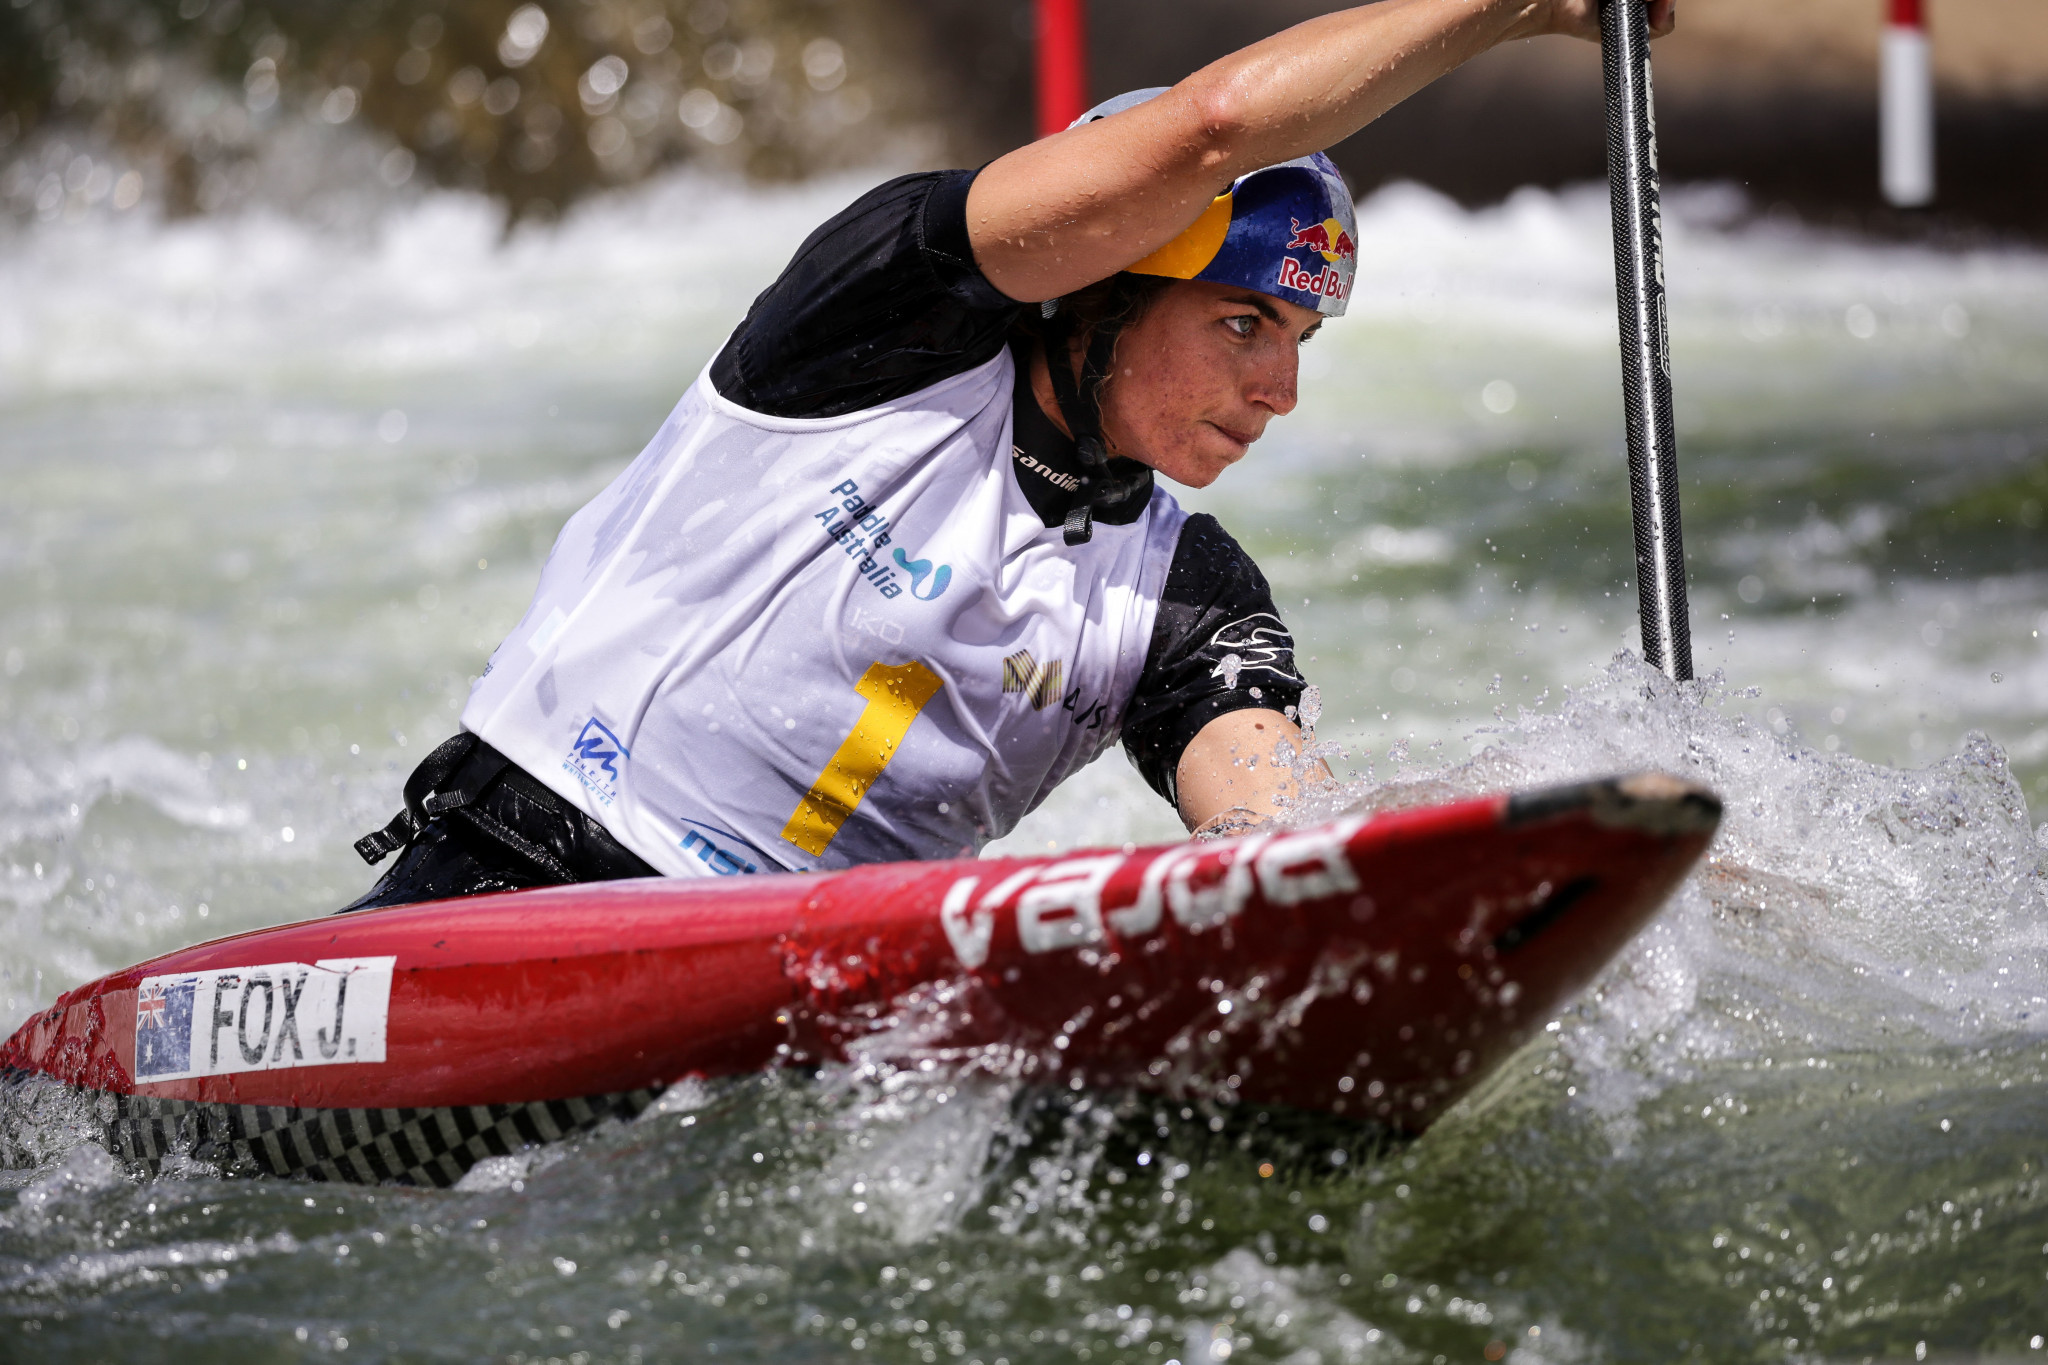 Australia's Jess Fox won the women's C1 qualifying event in front of a home crowd at the Oceania Canoe Slalom Championships ©Paddle Australia